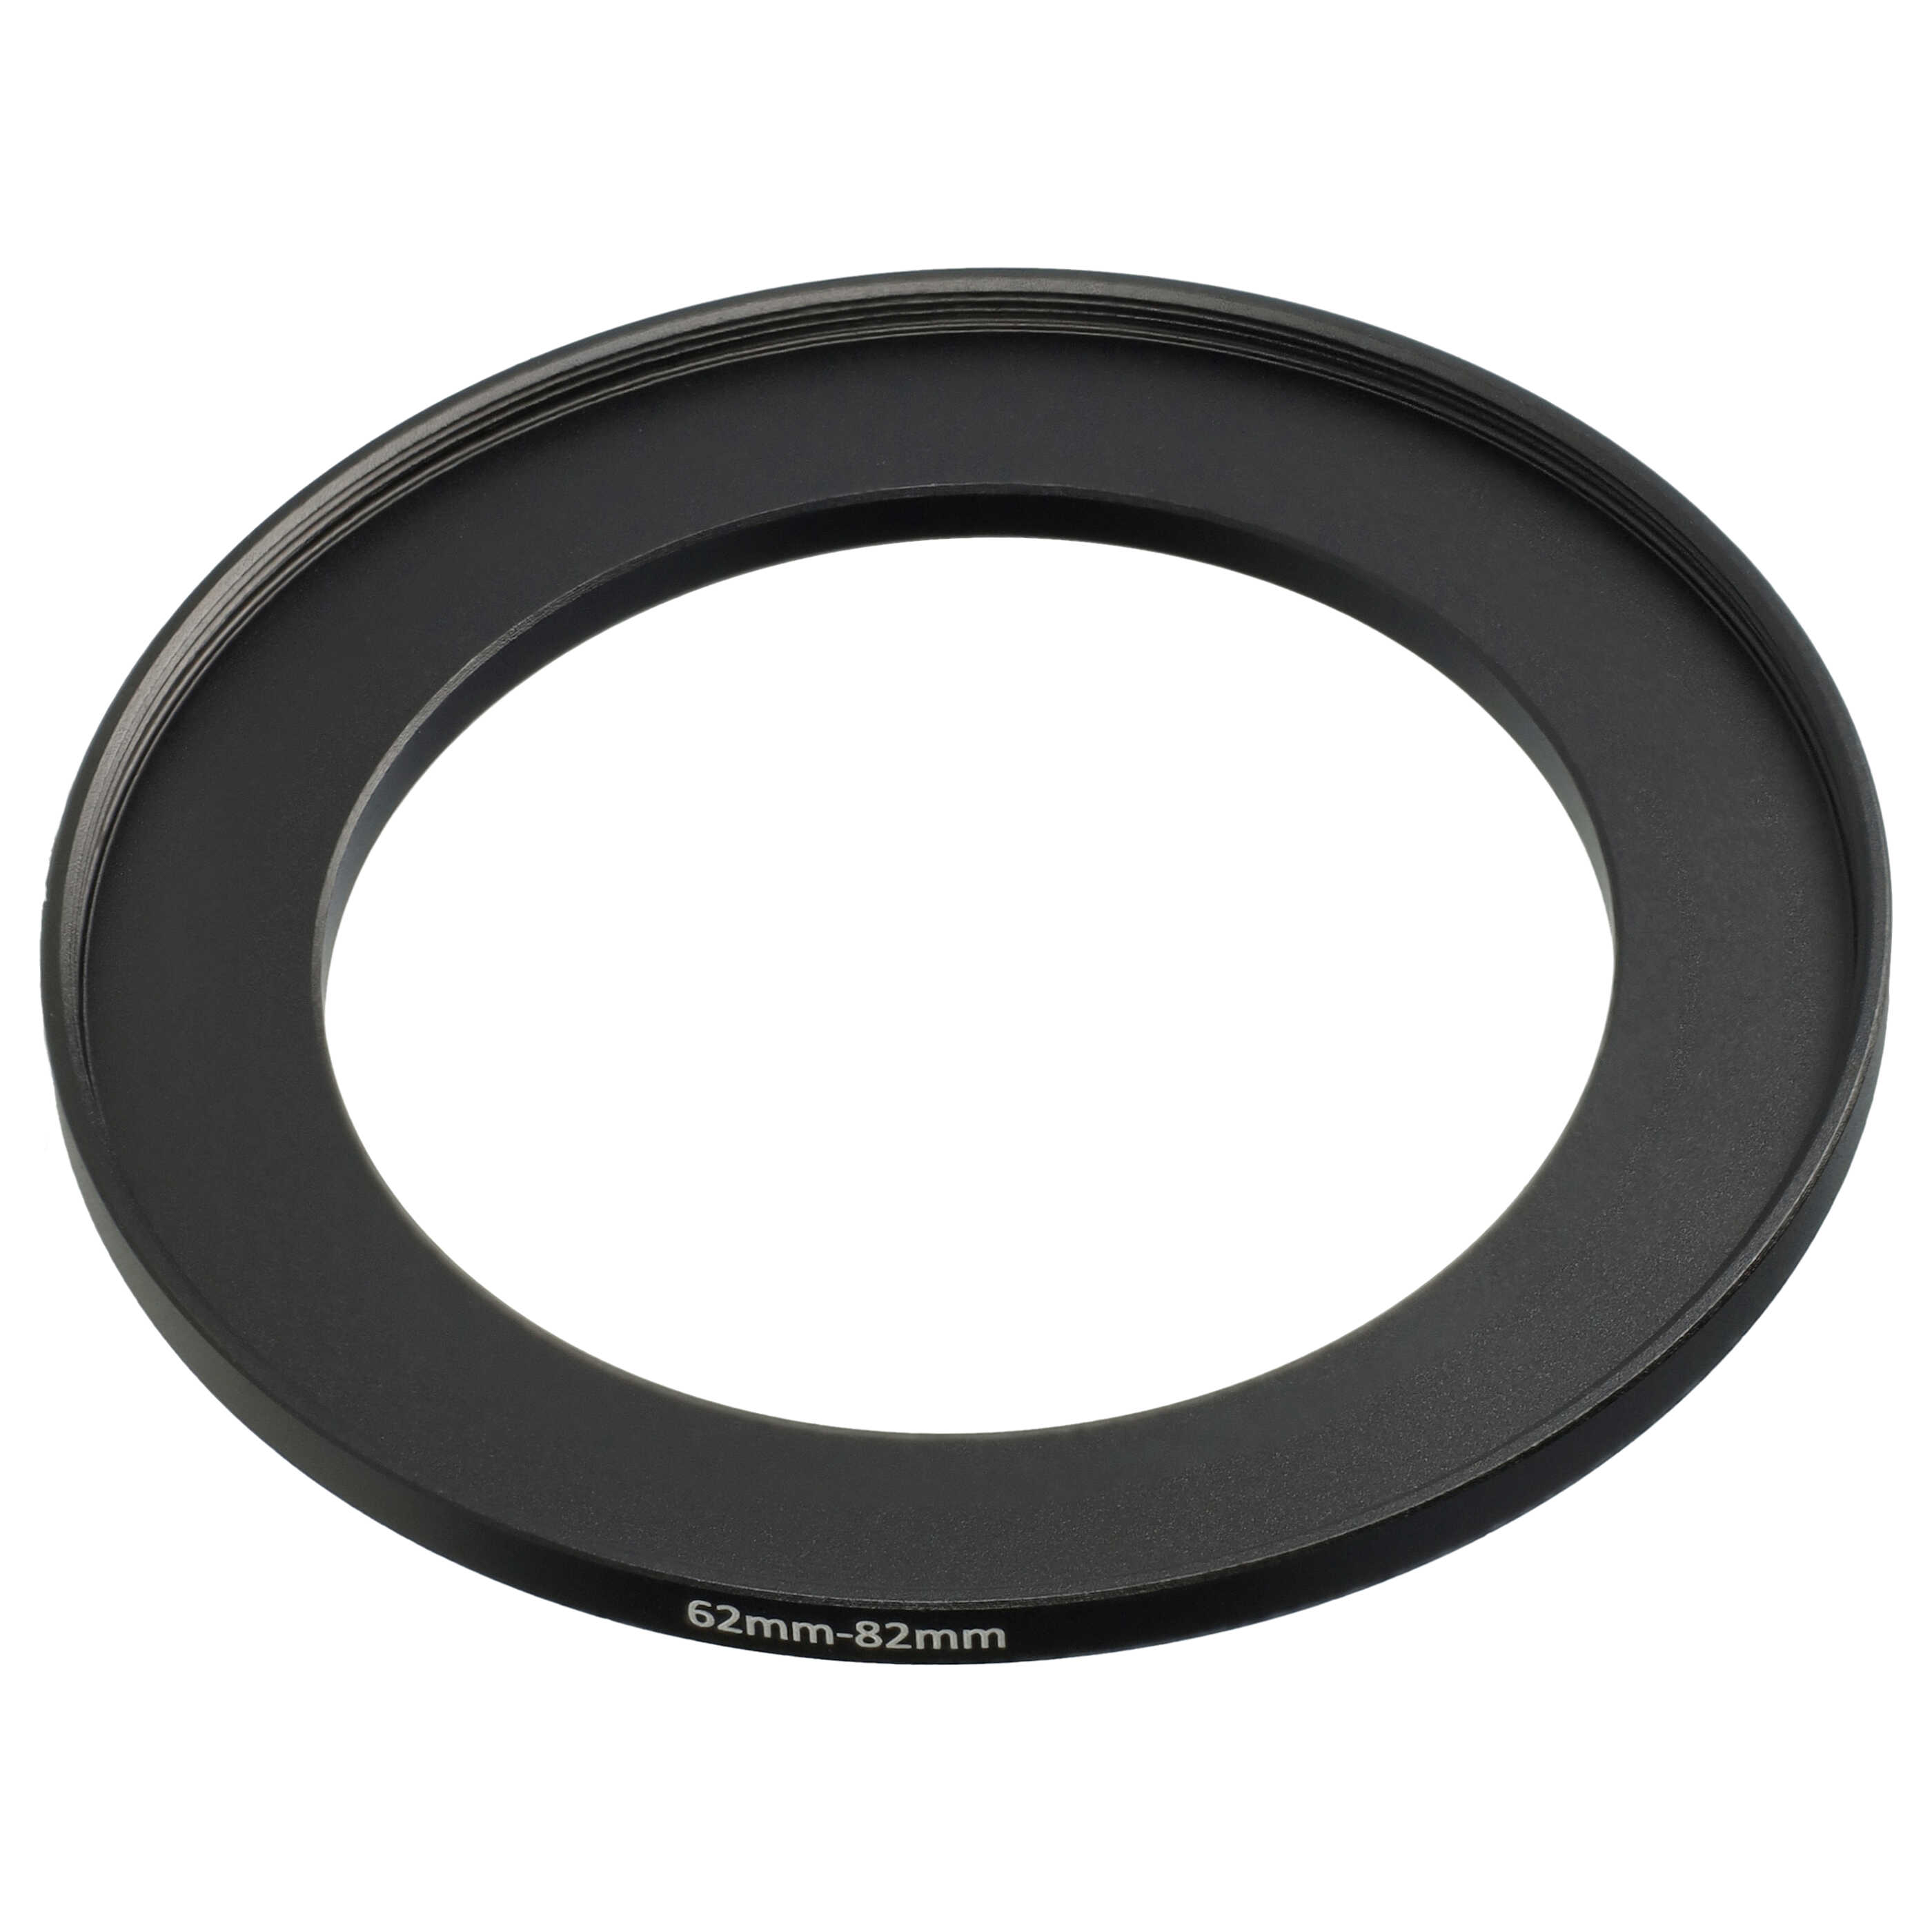 Step-Up Ring Adapter of 62 mm to 82 mmfor various Camera Lens - Filter Adapter